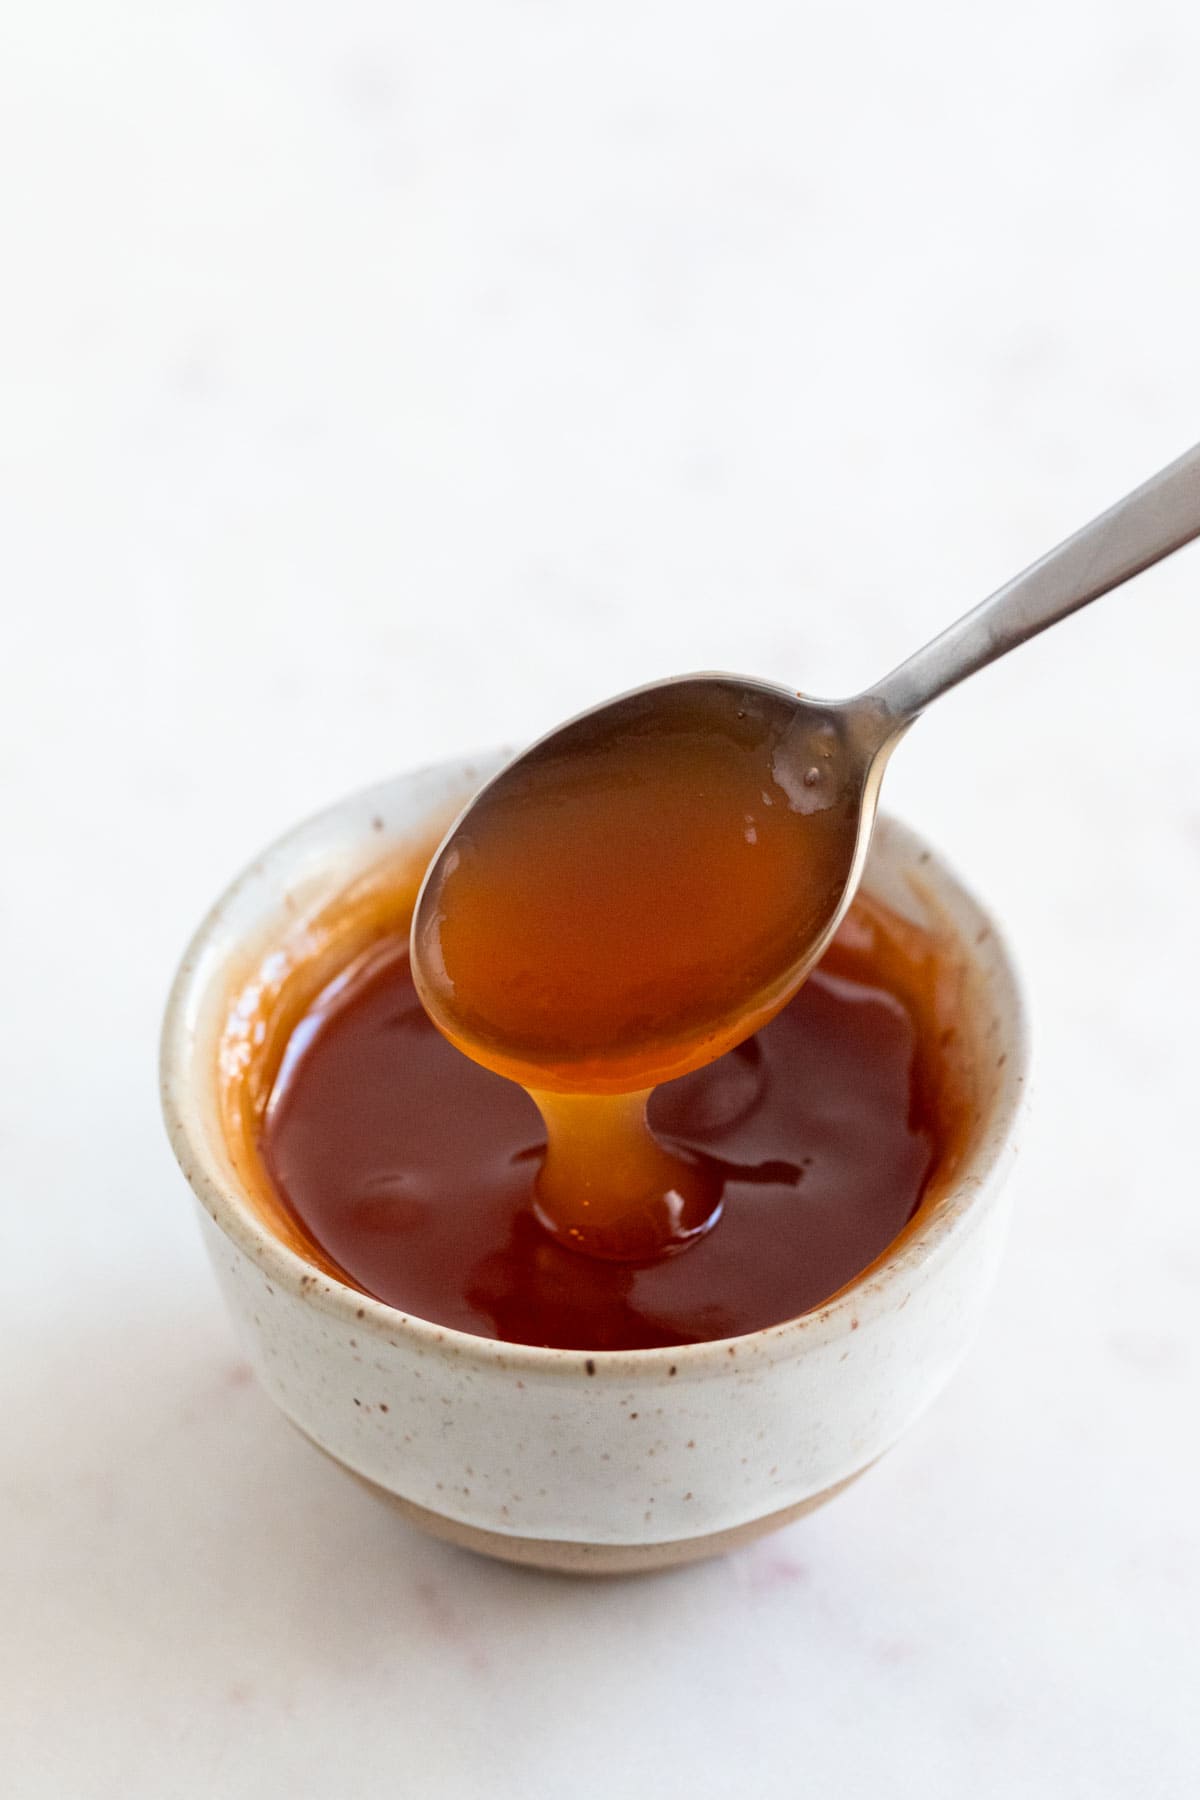 Spoon dipping into bowl of sweet and sour sauce.